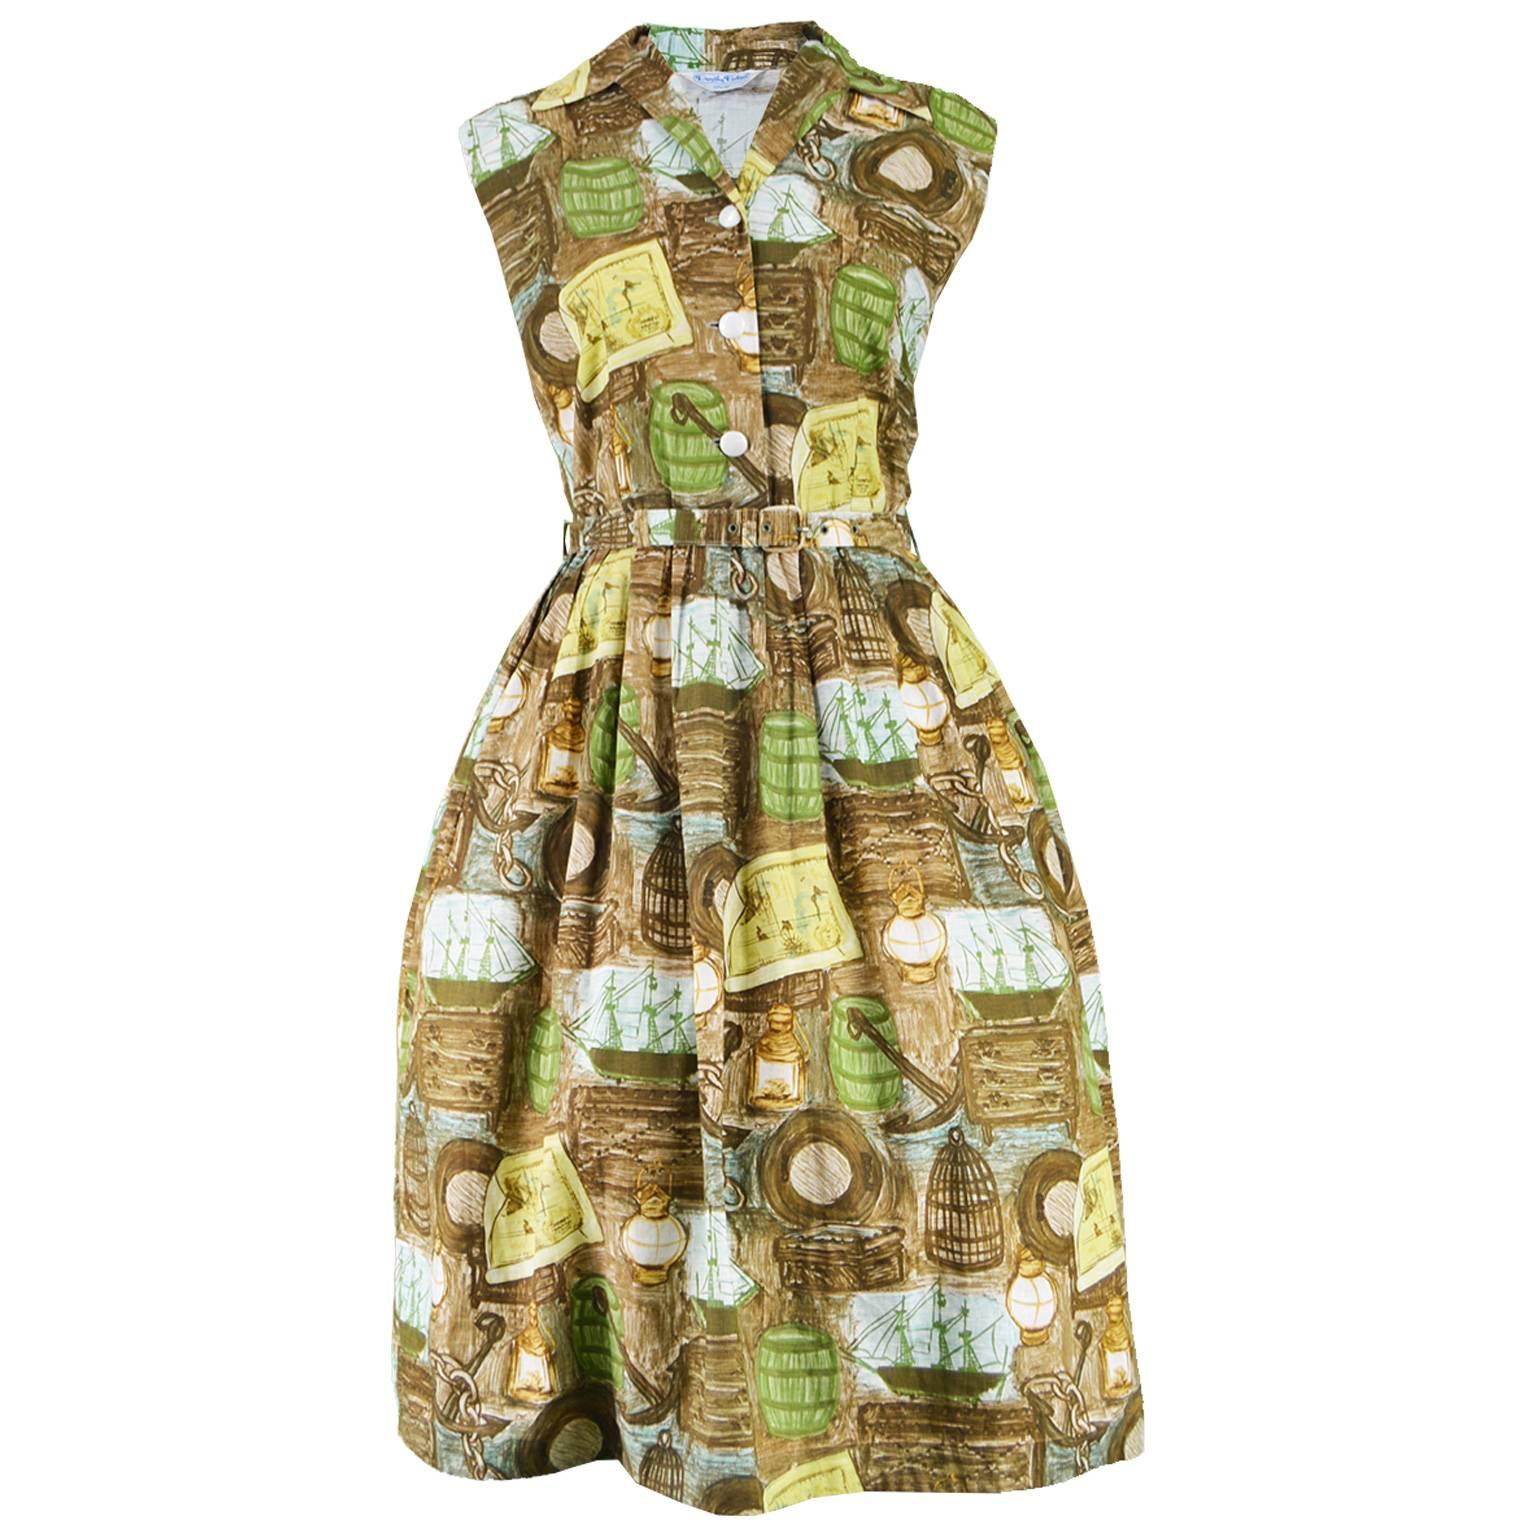 Vintage 1950s Novelty Print Nautical Theme Brown & Green Cotton Dress For Sale